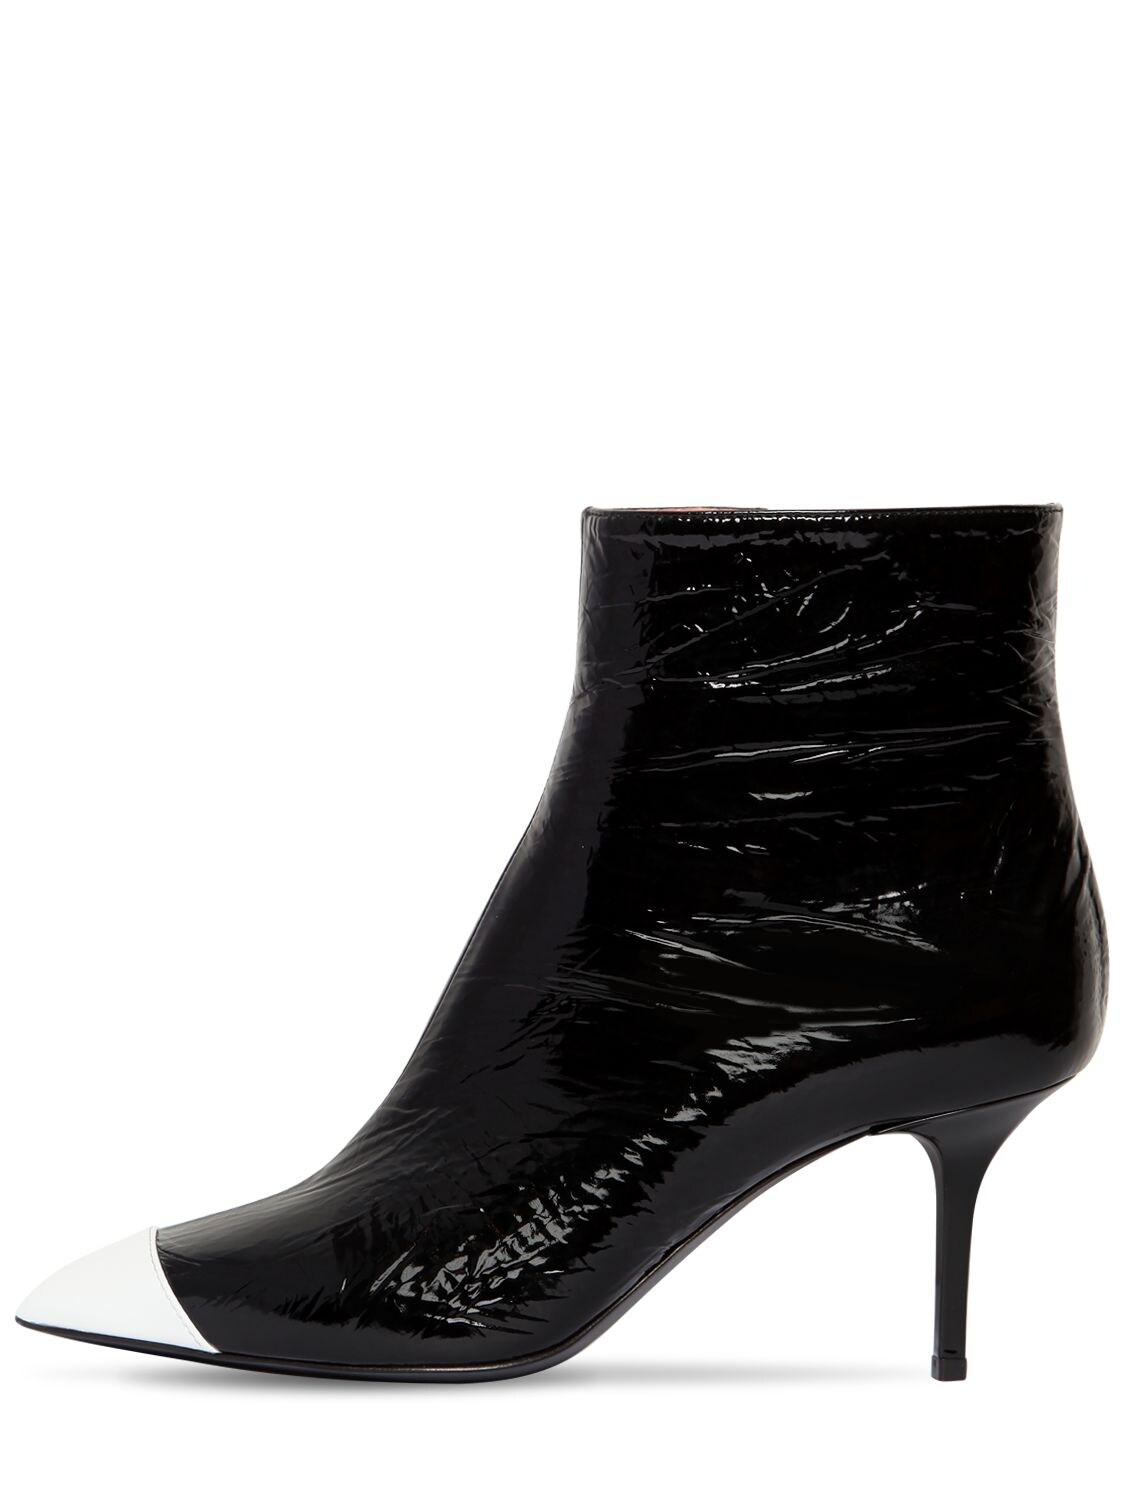 black patent leather ankle boots